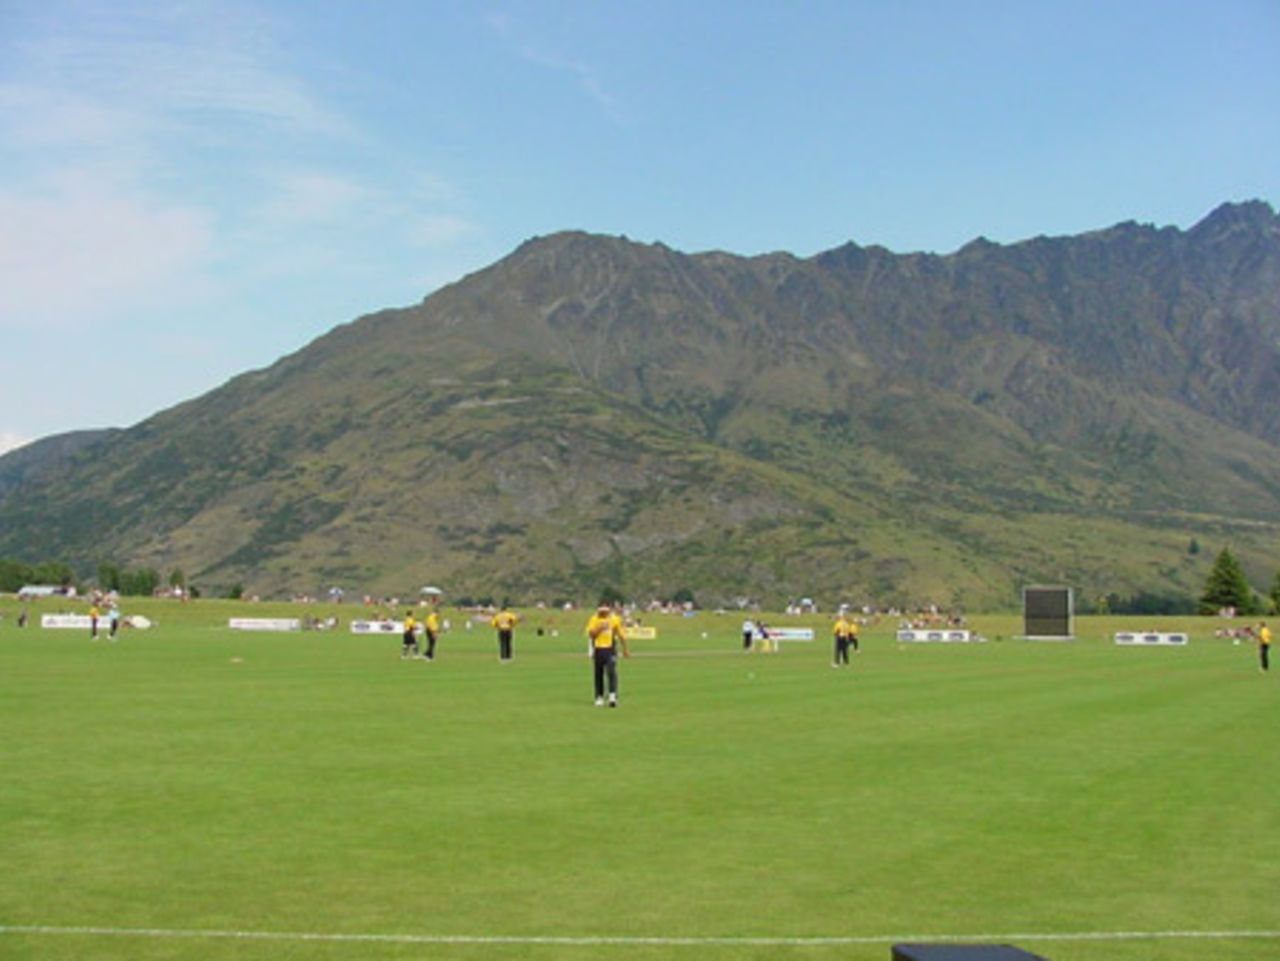 Wellington in the field with the Remarkables mountain range in the background. State Shield: Otago v Wellington at John Davies Oval, Queenstown, 2 January 2002.